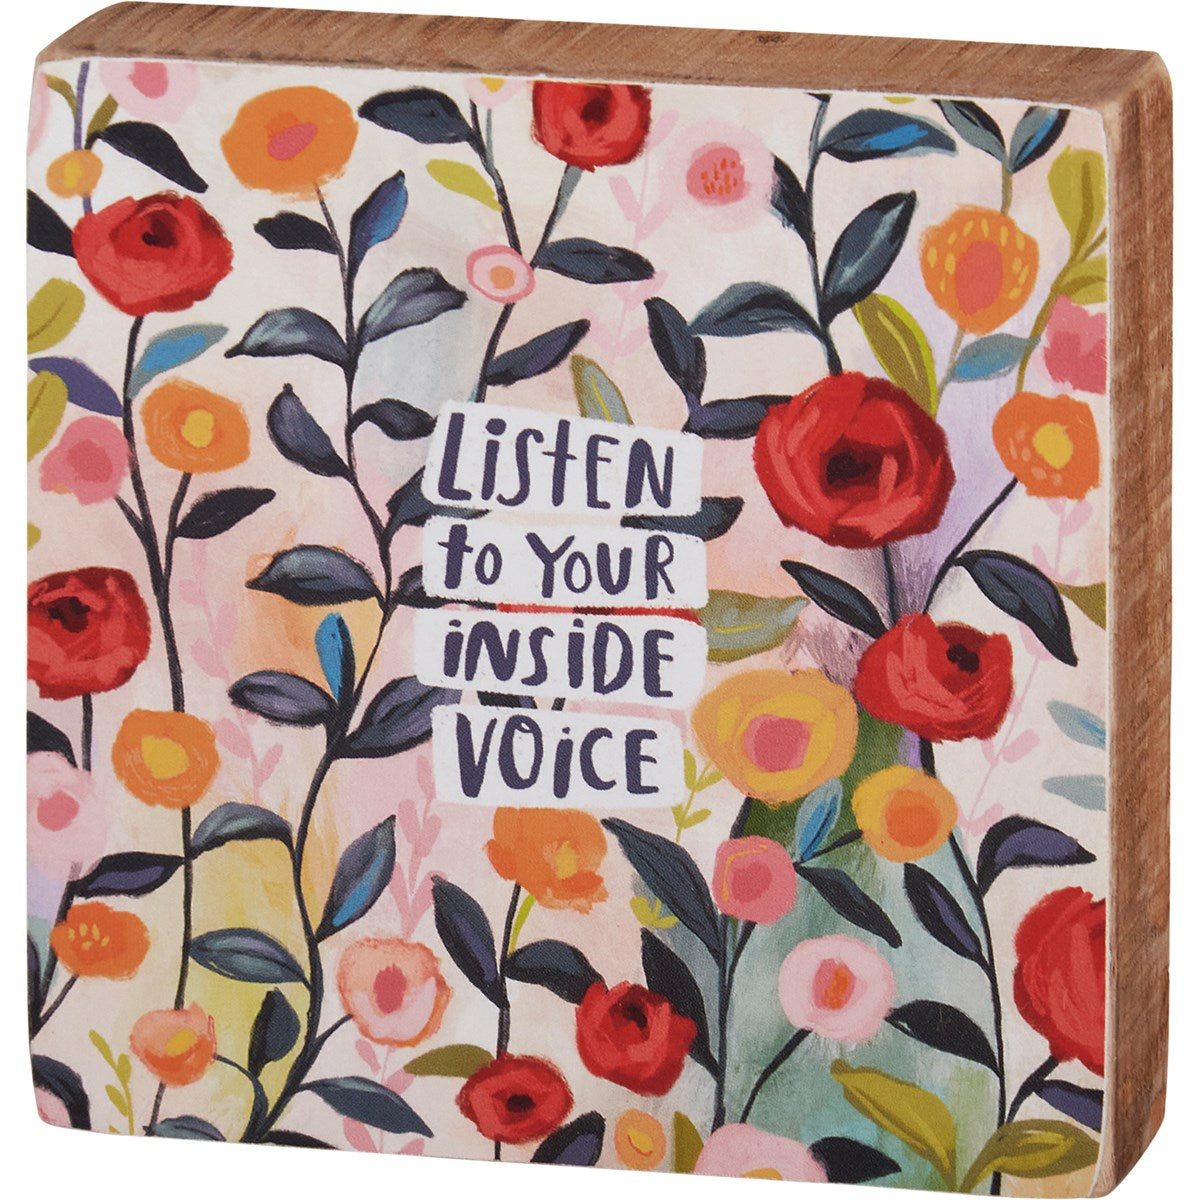 Block Sign - "Listen To Your Inside Voice"